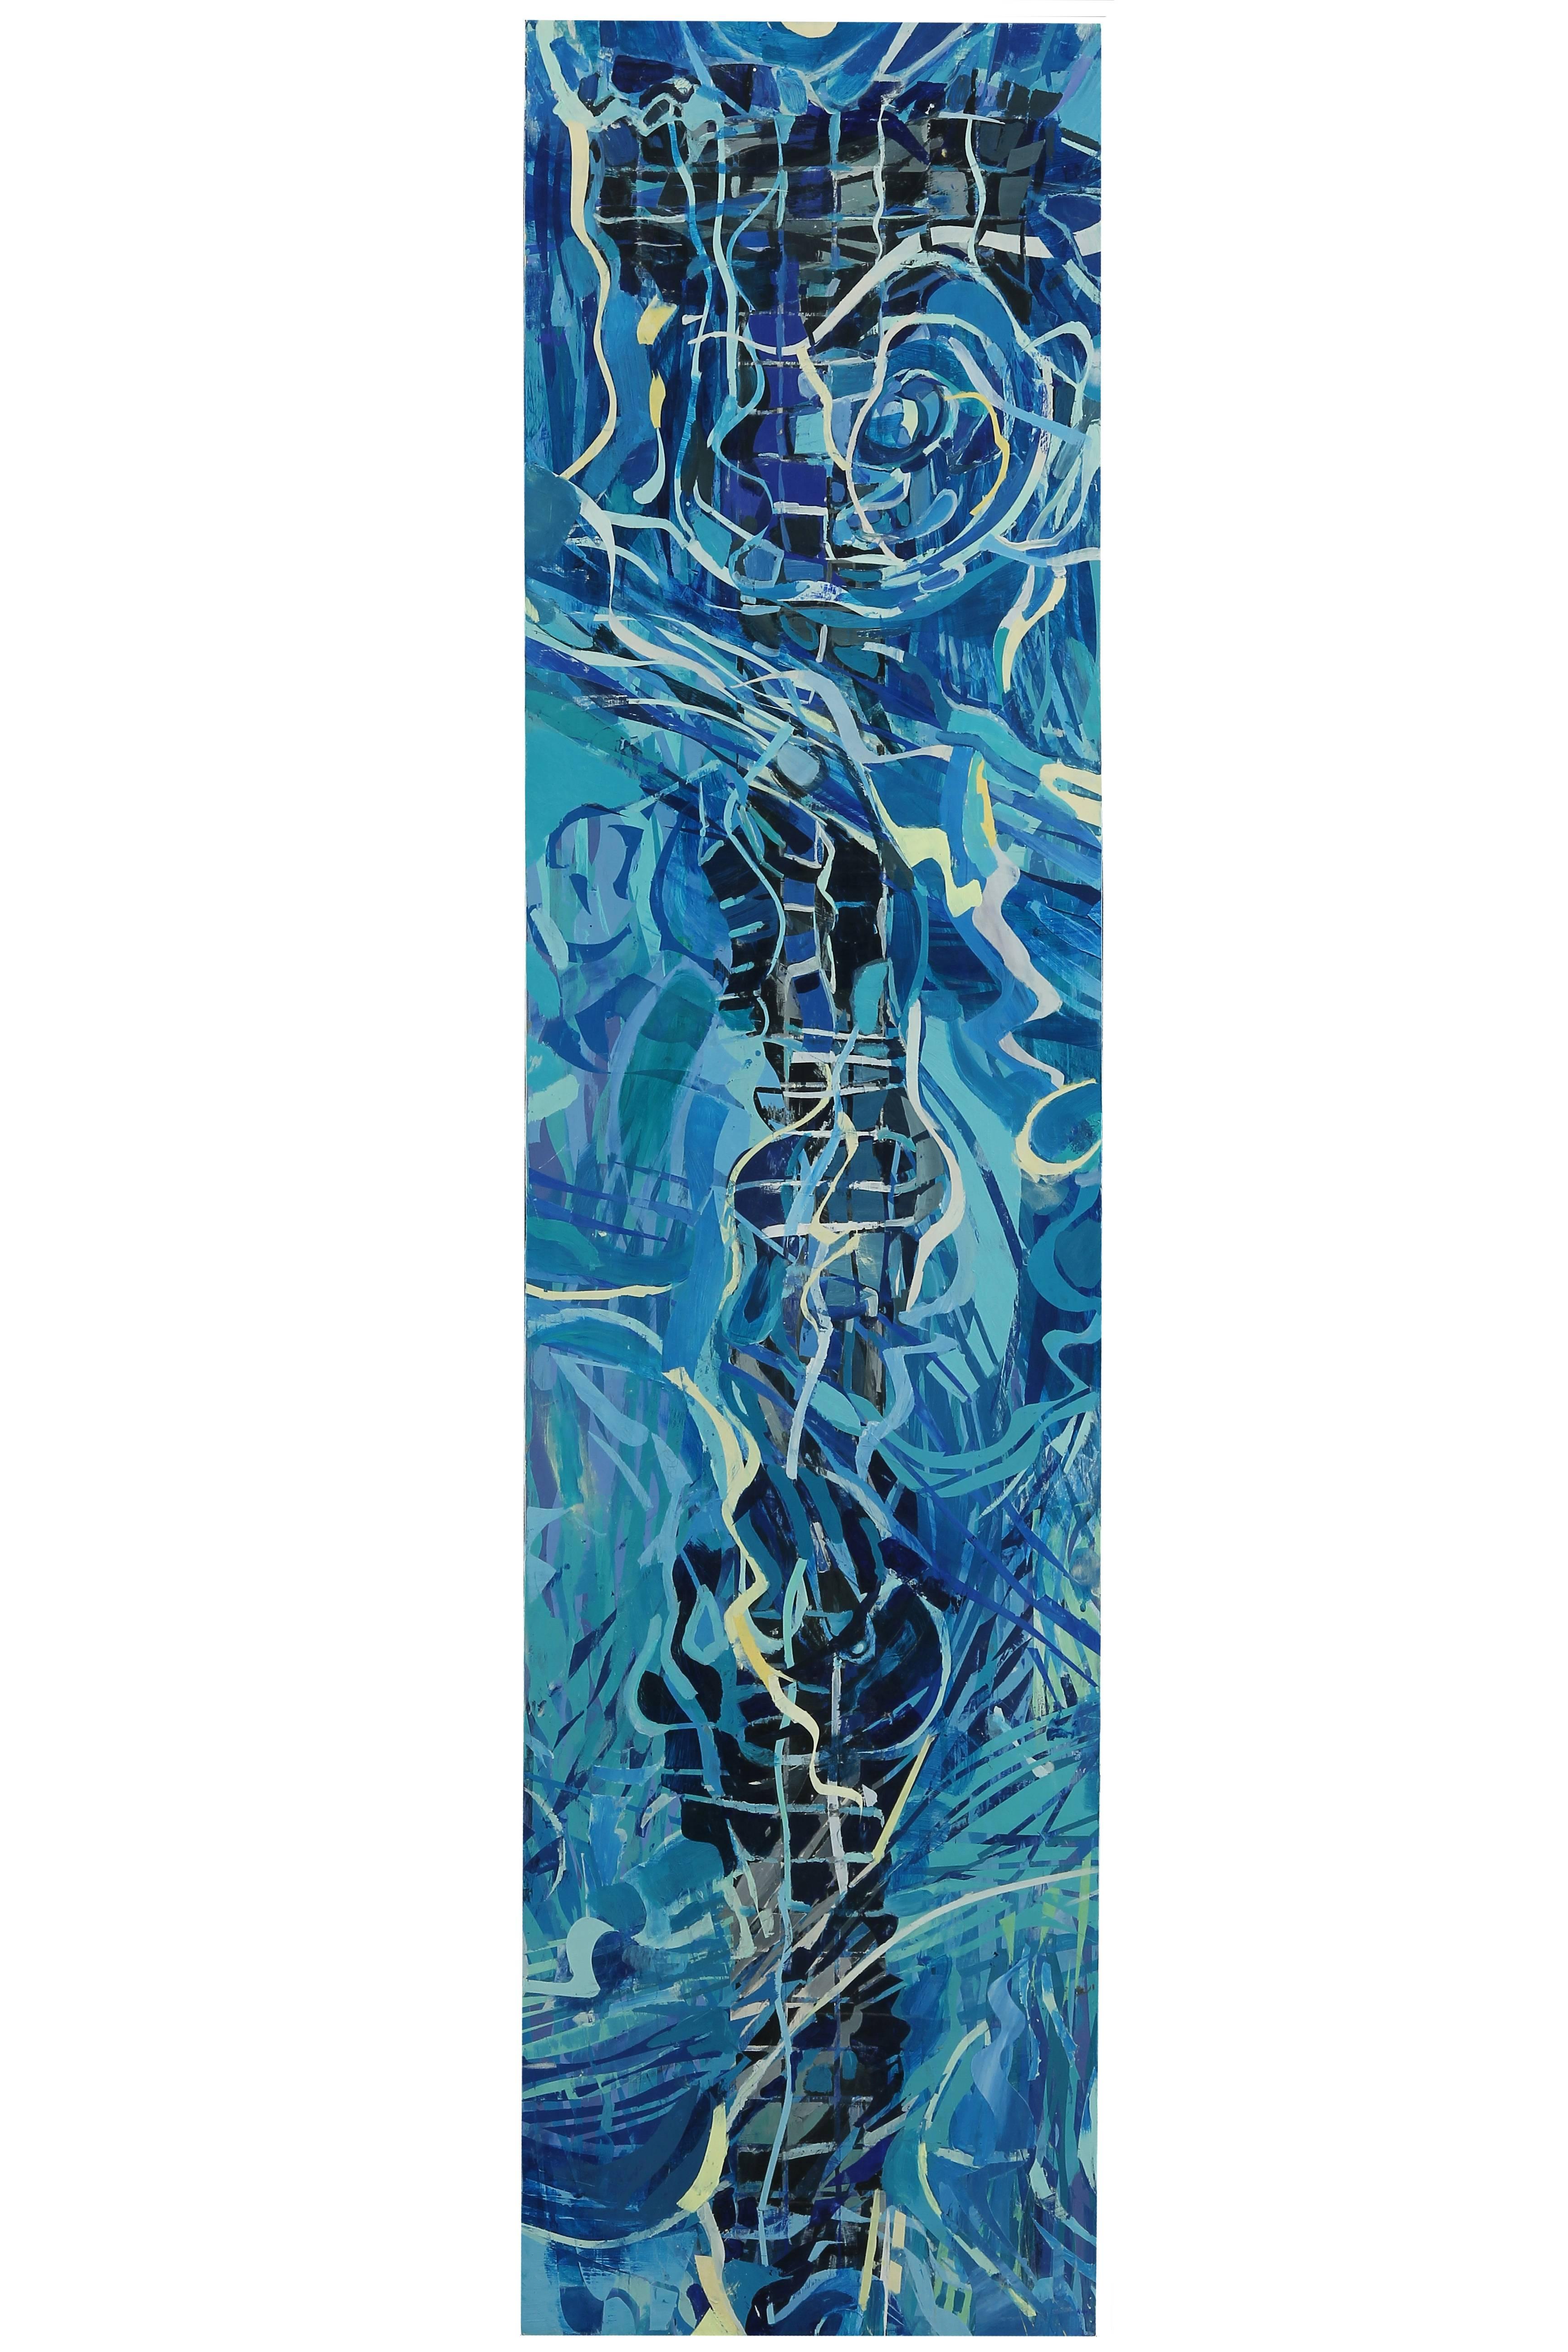 Pool Lanes:Turbulence I &II (12 x 96 inches) - Contemporary Painting by Kim Frohsin